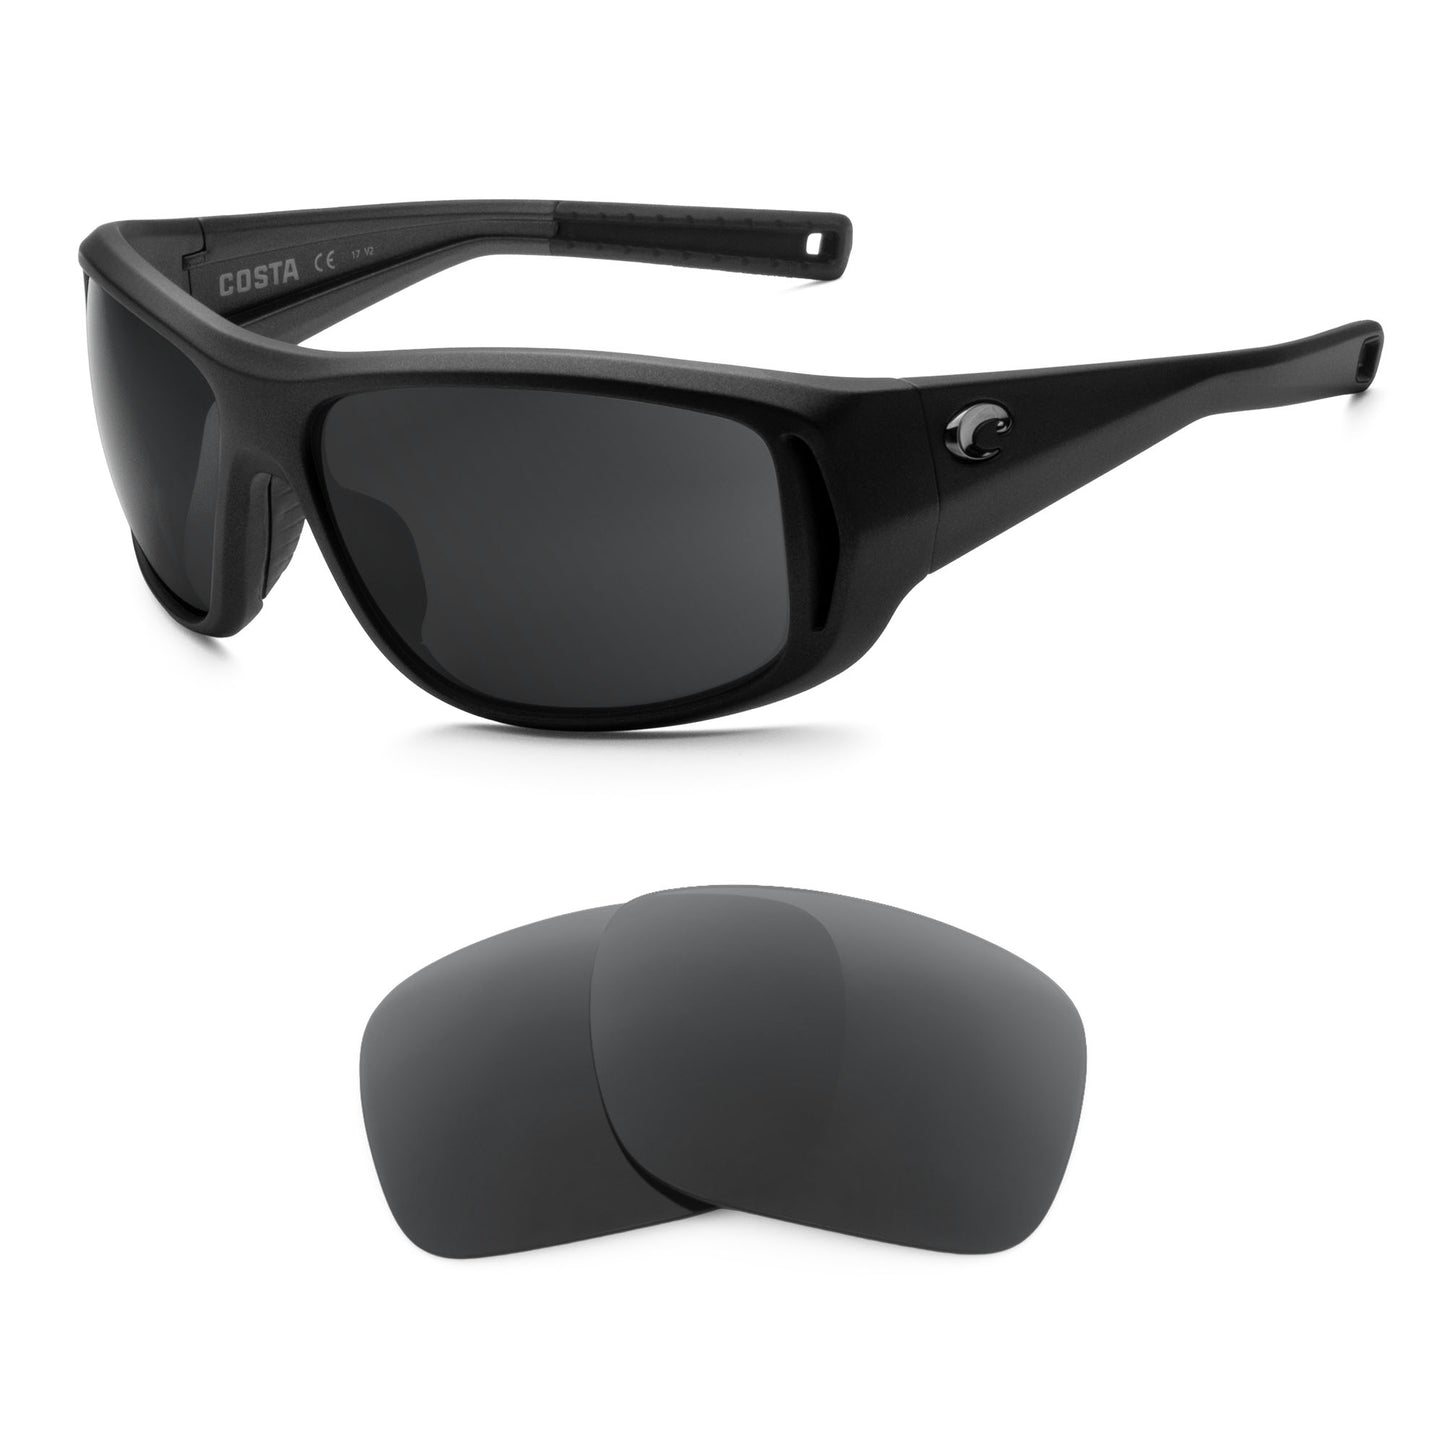 Costa Montauk sunglasses with replacement lenses